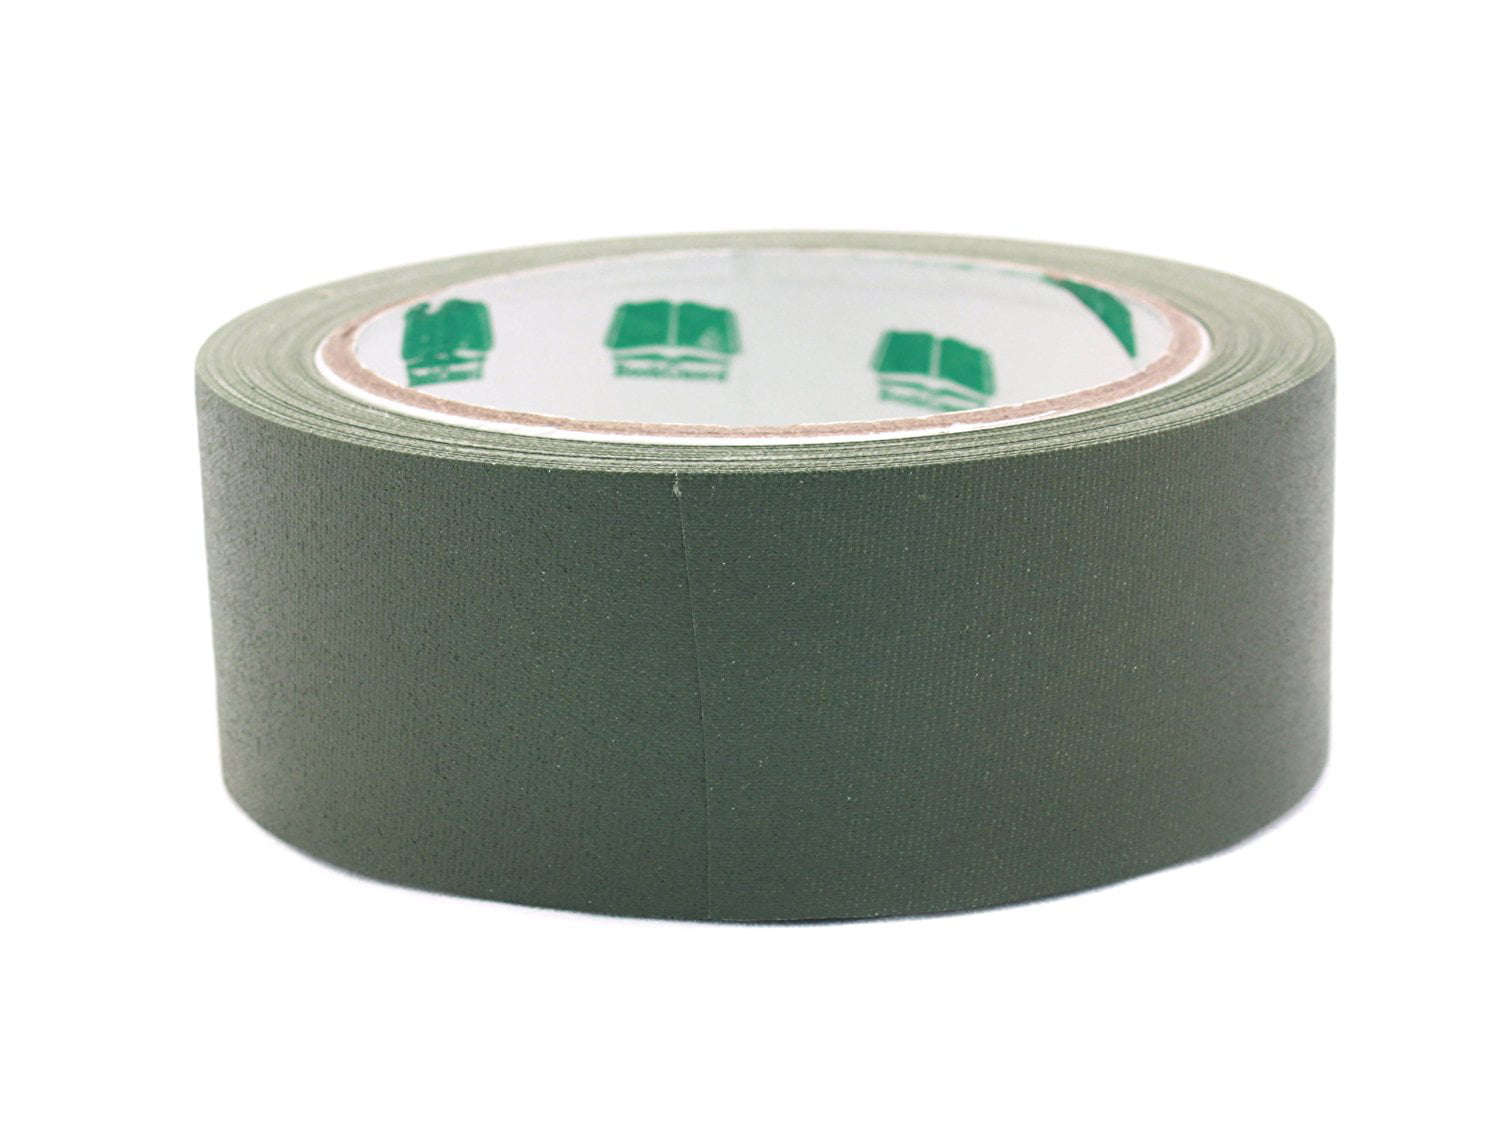 15 Yard Roll Forest Green BookGuard 1-1/2 Inch  Vinyl-Coated Cotton Cloth Book Binding Repair Tape 